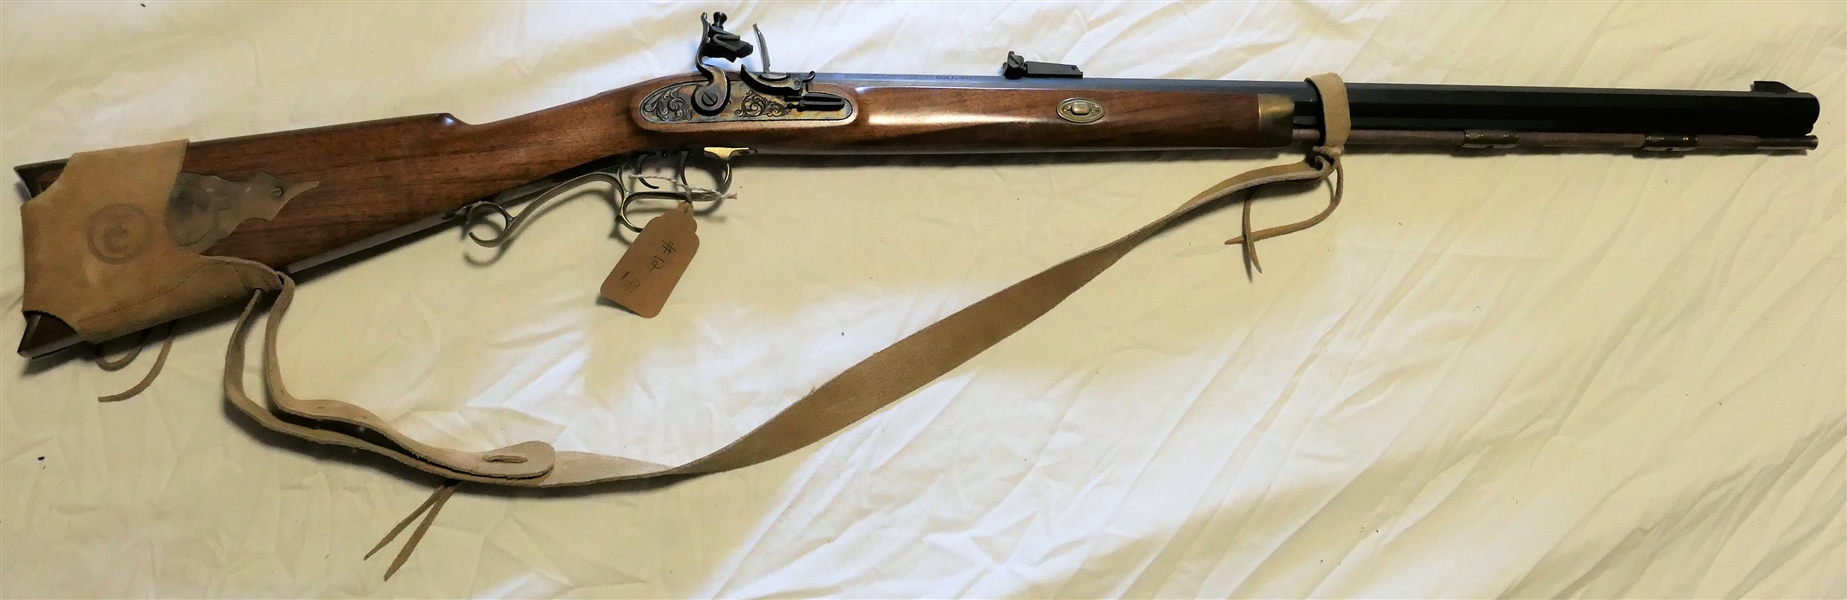 Thompson Center Arms . 45 Caliber Black Powder Long Rifle - Double Trigger with Brass Patch Box and Leather Sling Strap